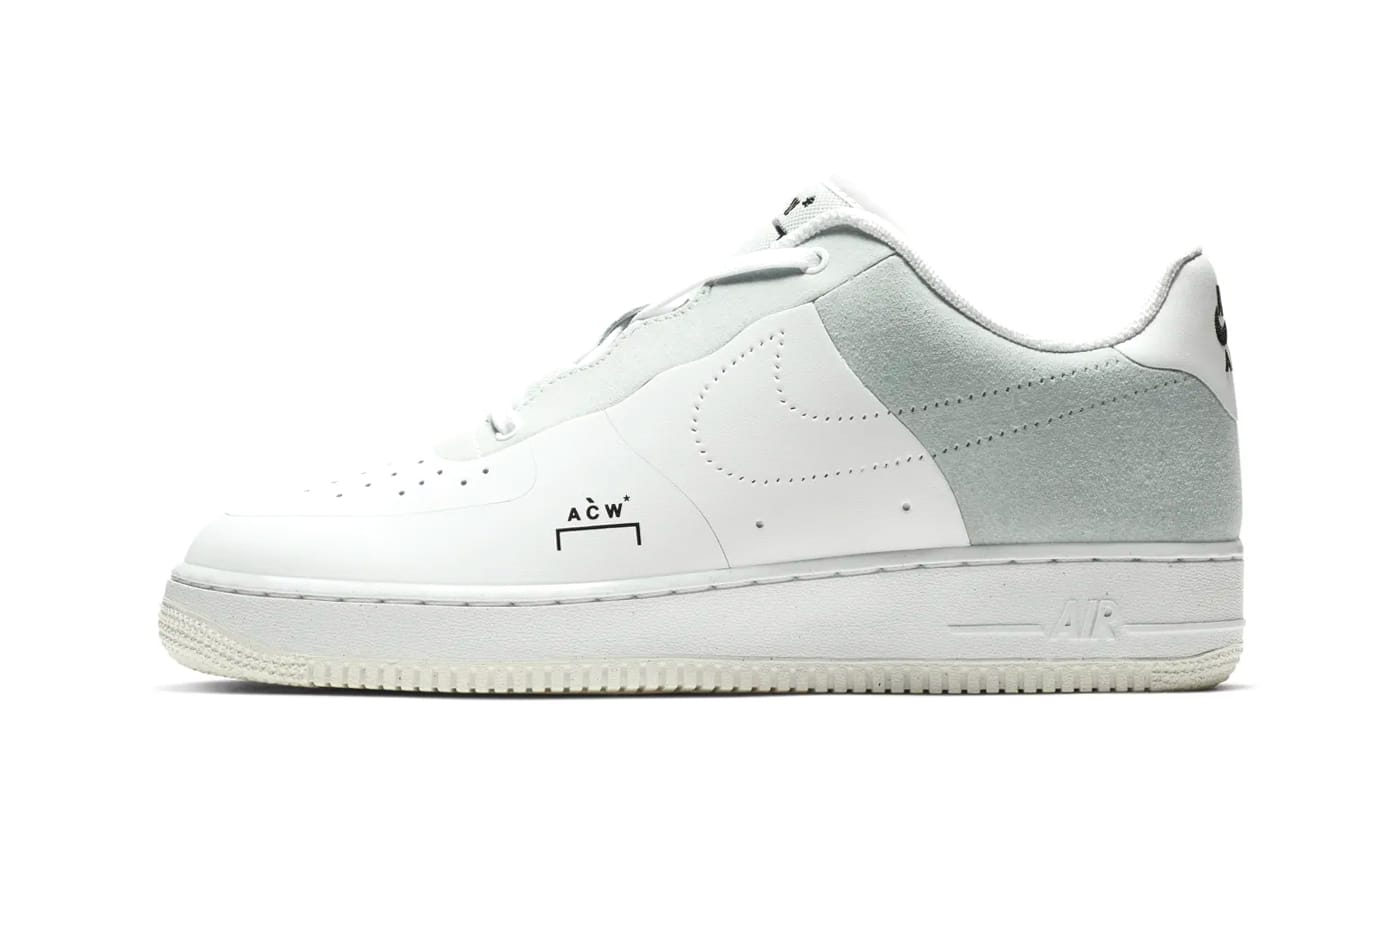 A-COLD-WALL* x Nike Air Force 1 Re-Release | HYPEBEAST